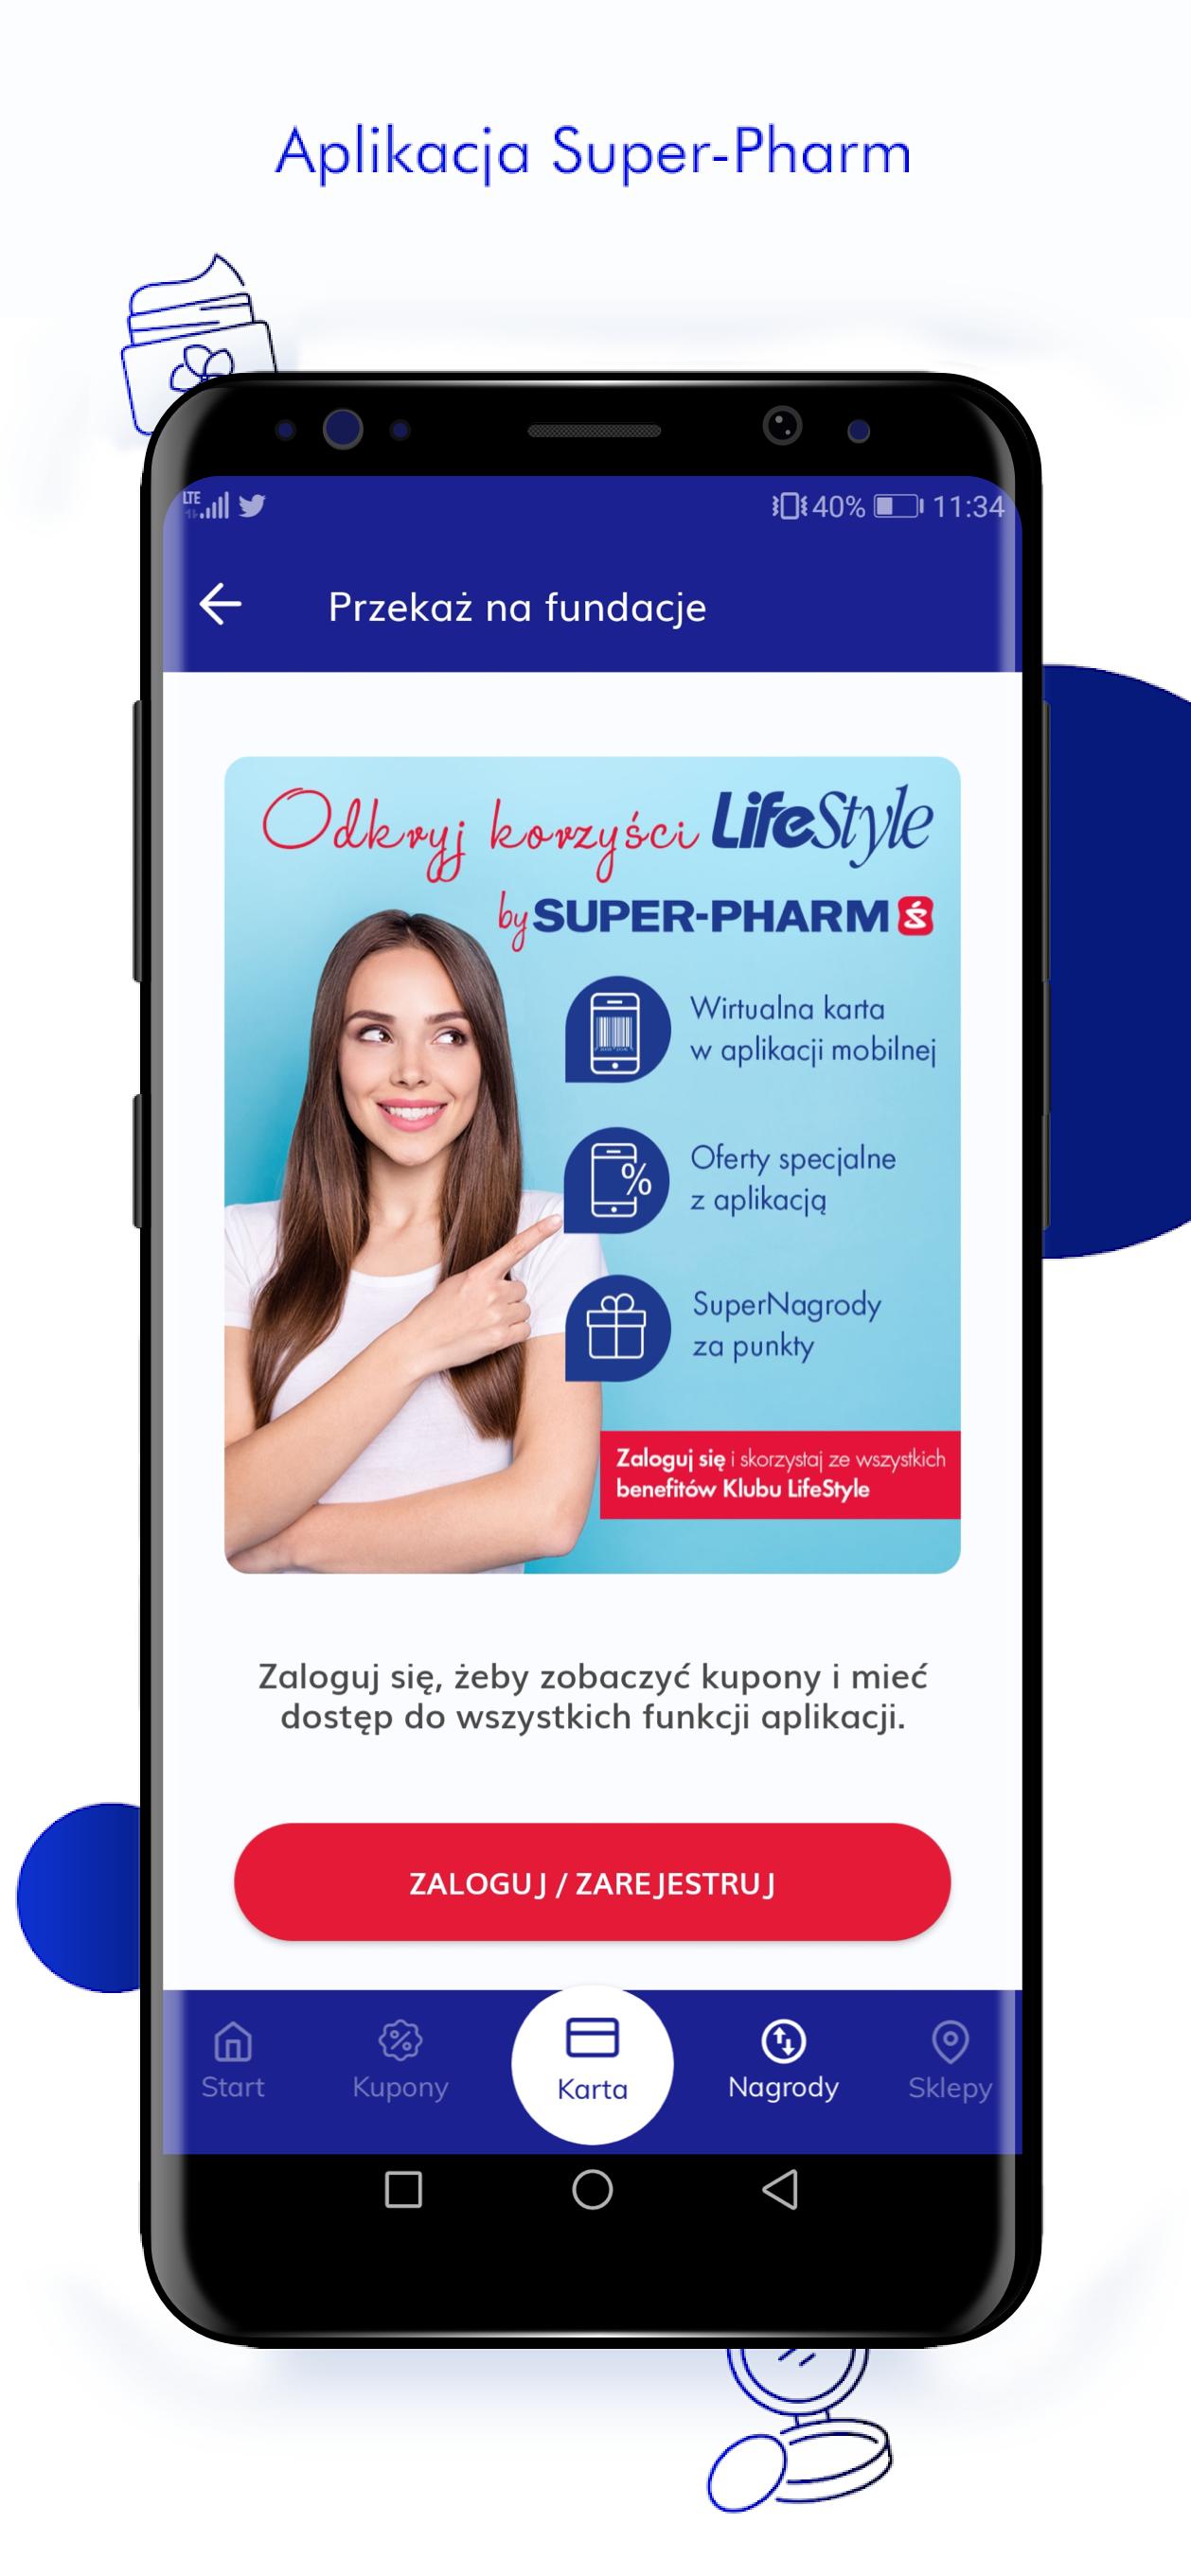 Super-Pharm for Android - APK Download